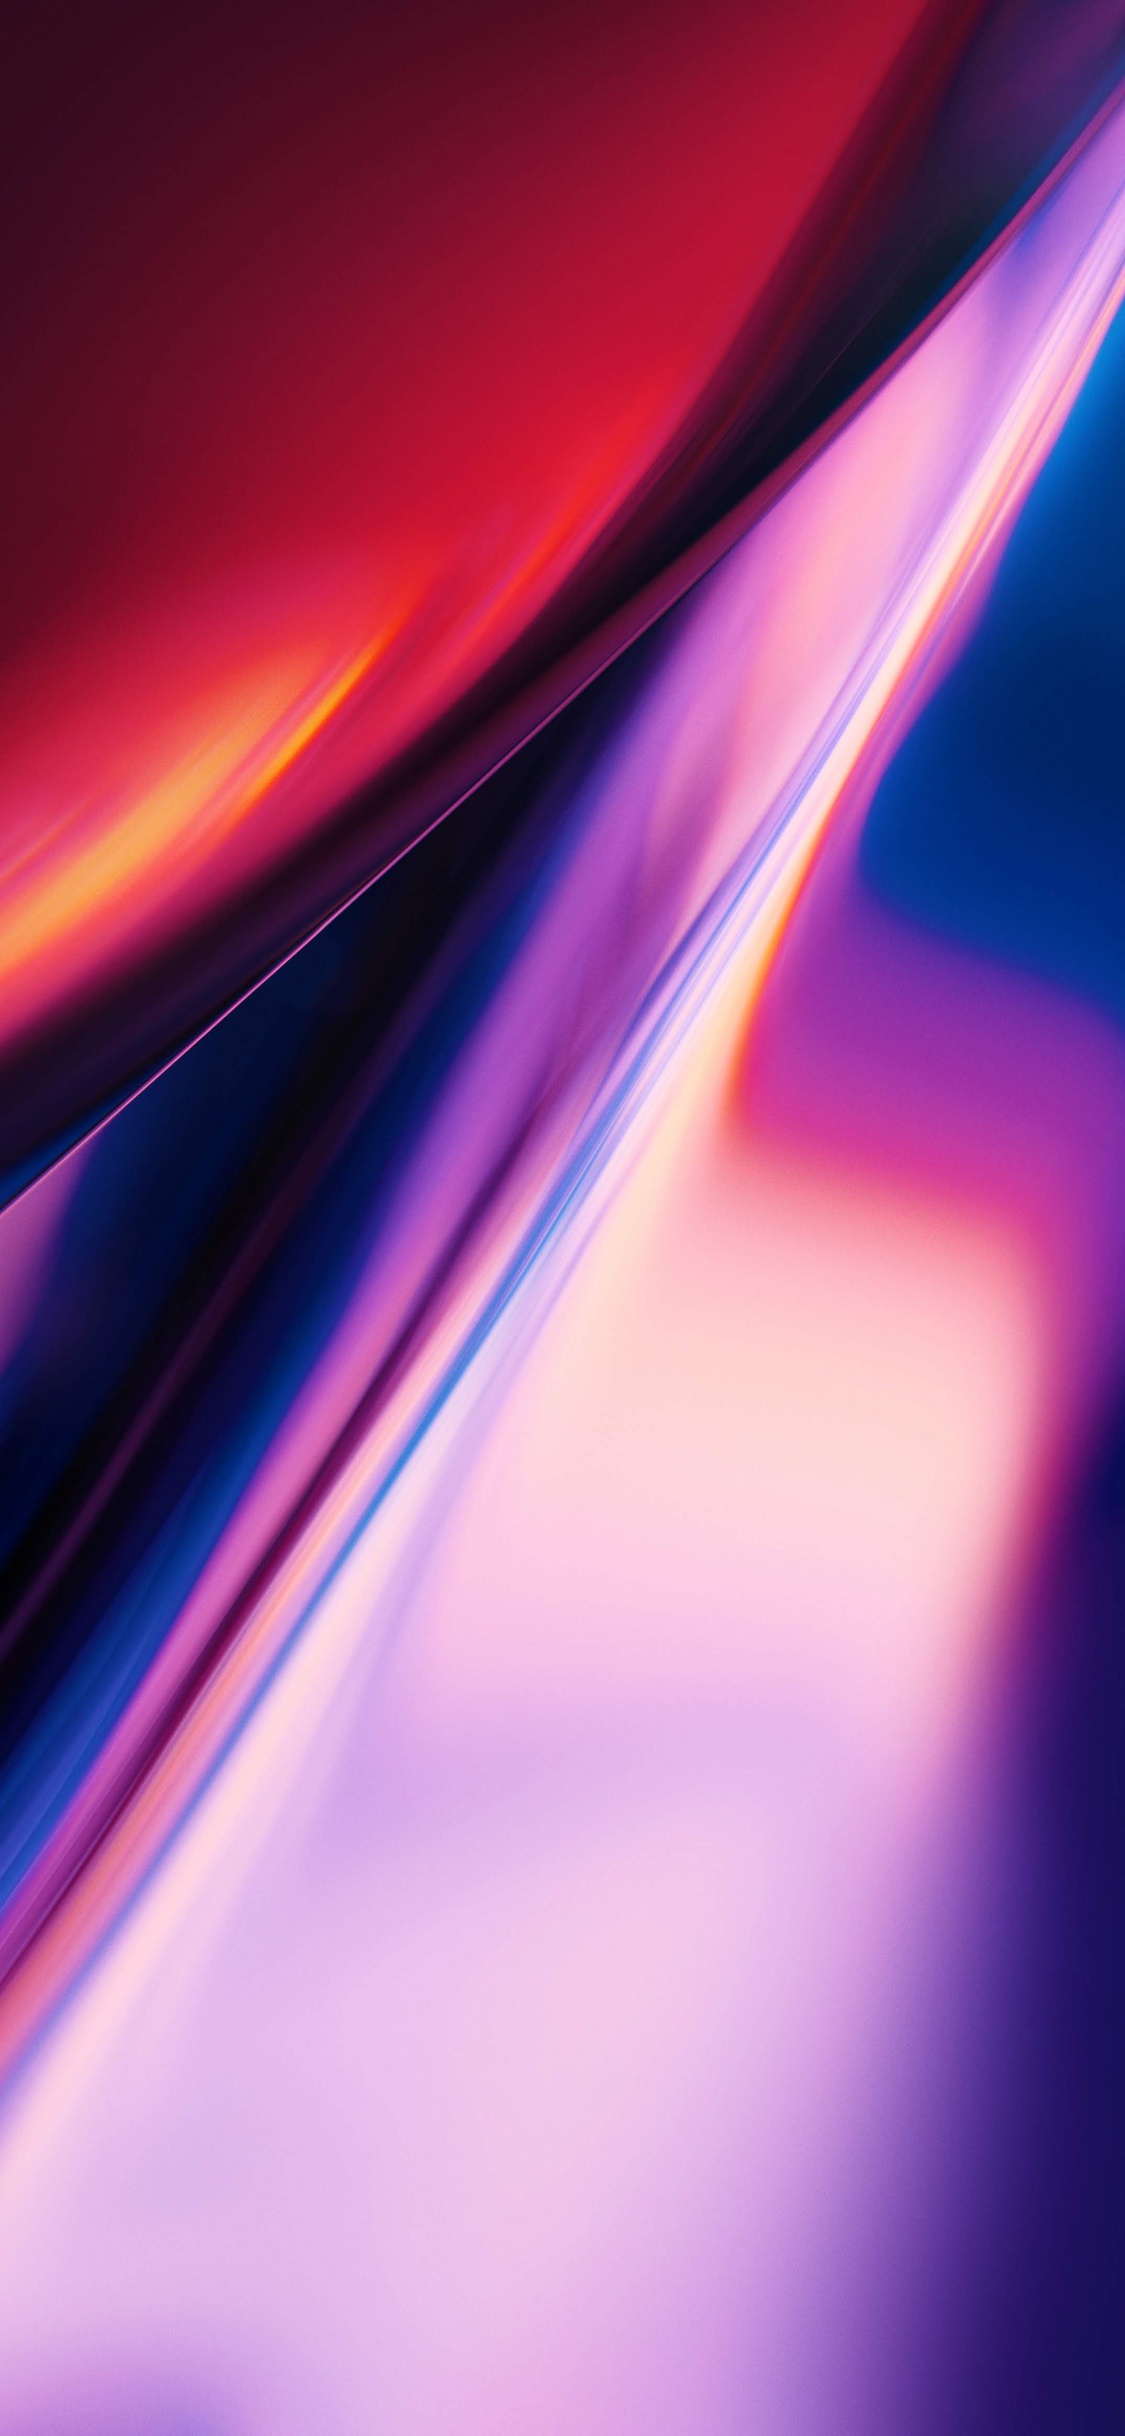 OnePlus 7 Pro, Oneplus 7t, Oneplus 8, Android, Colorfulness. Wallpaper in 1125x2436 Resolution